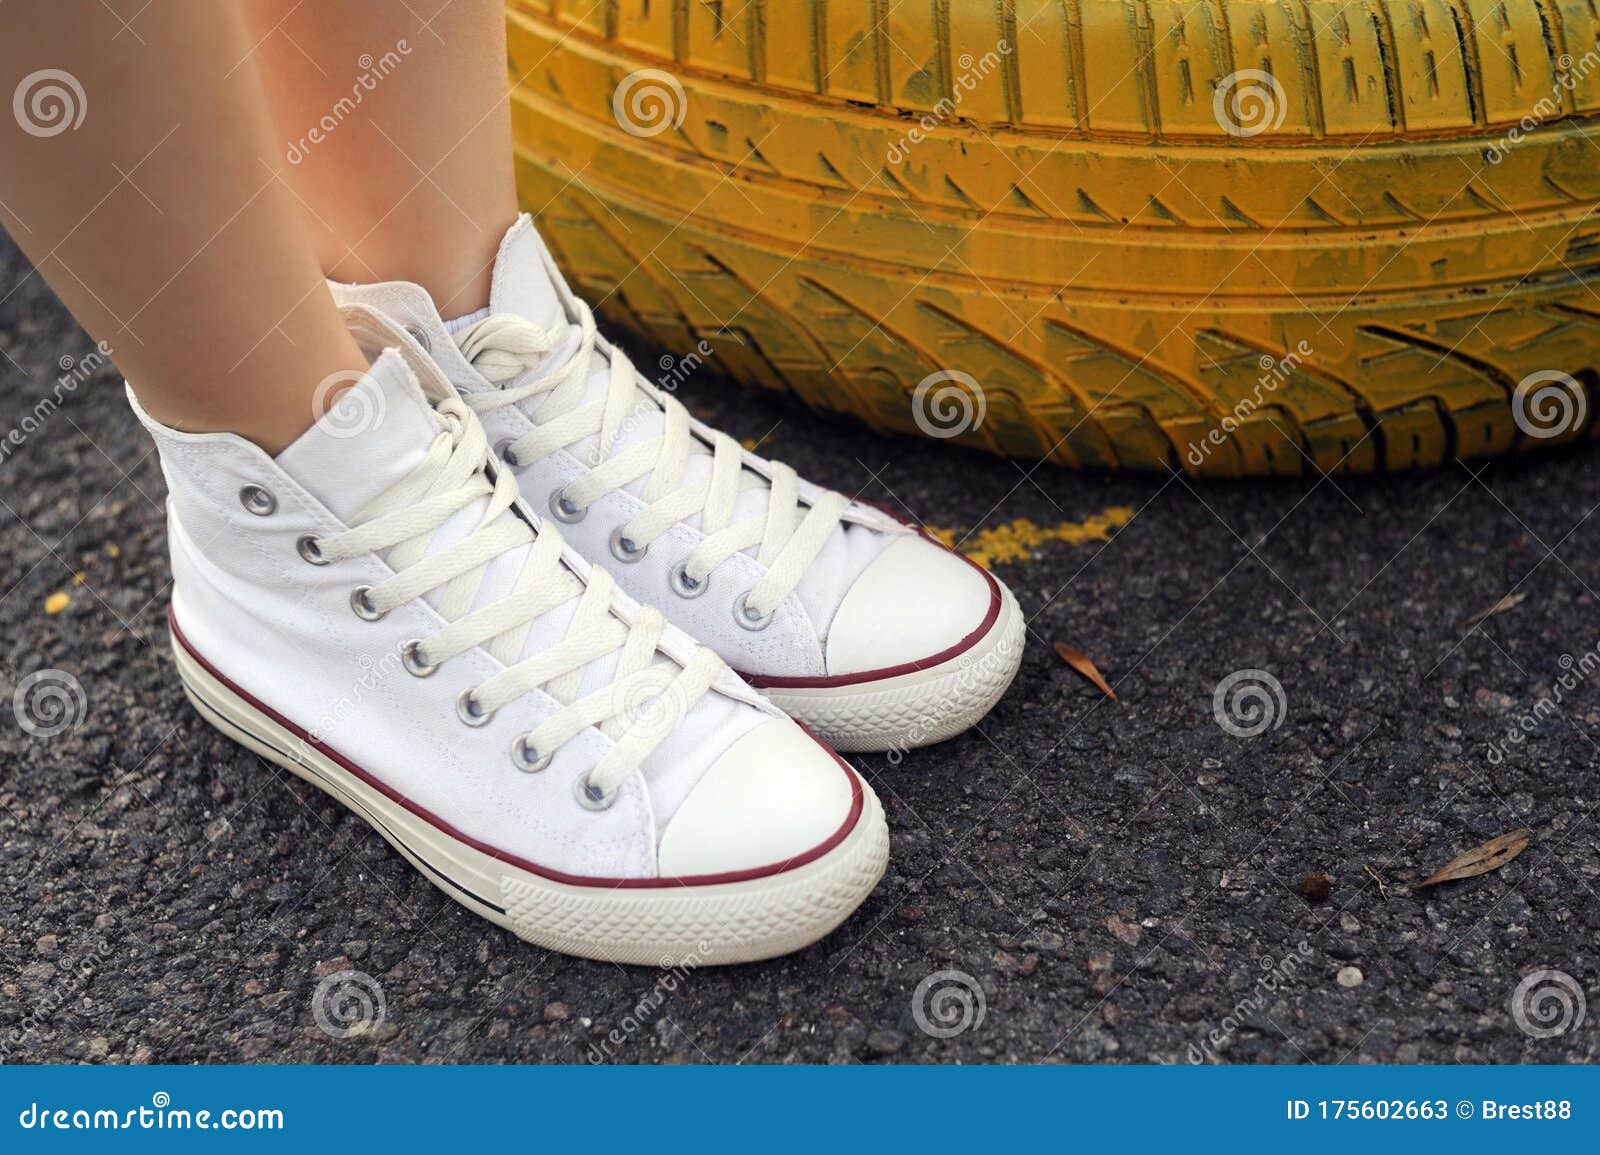 Belarus, Minsk - June 27, 2019: a Girl White Cloth Converse Sneakers Stands Old Car Tires. Stock Image - Image of footwear, side: 175602663